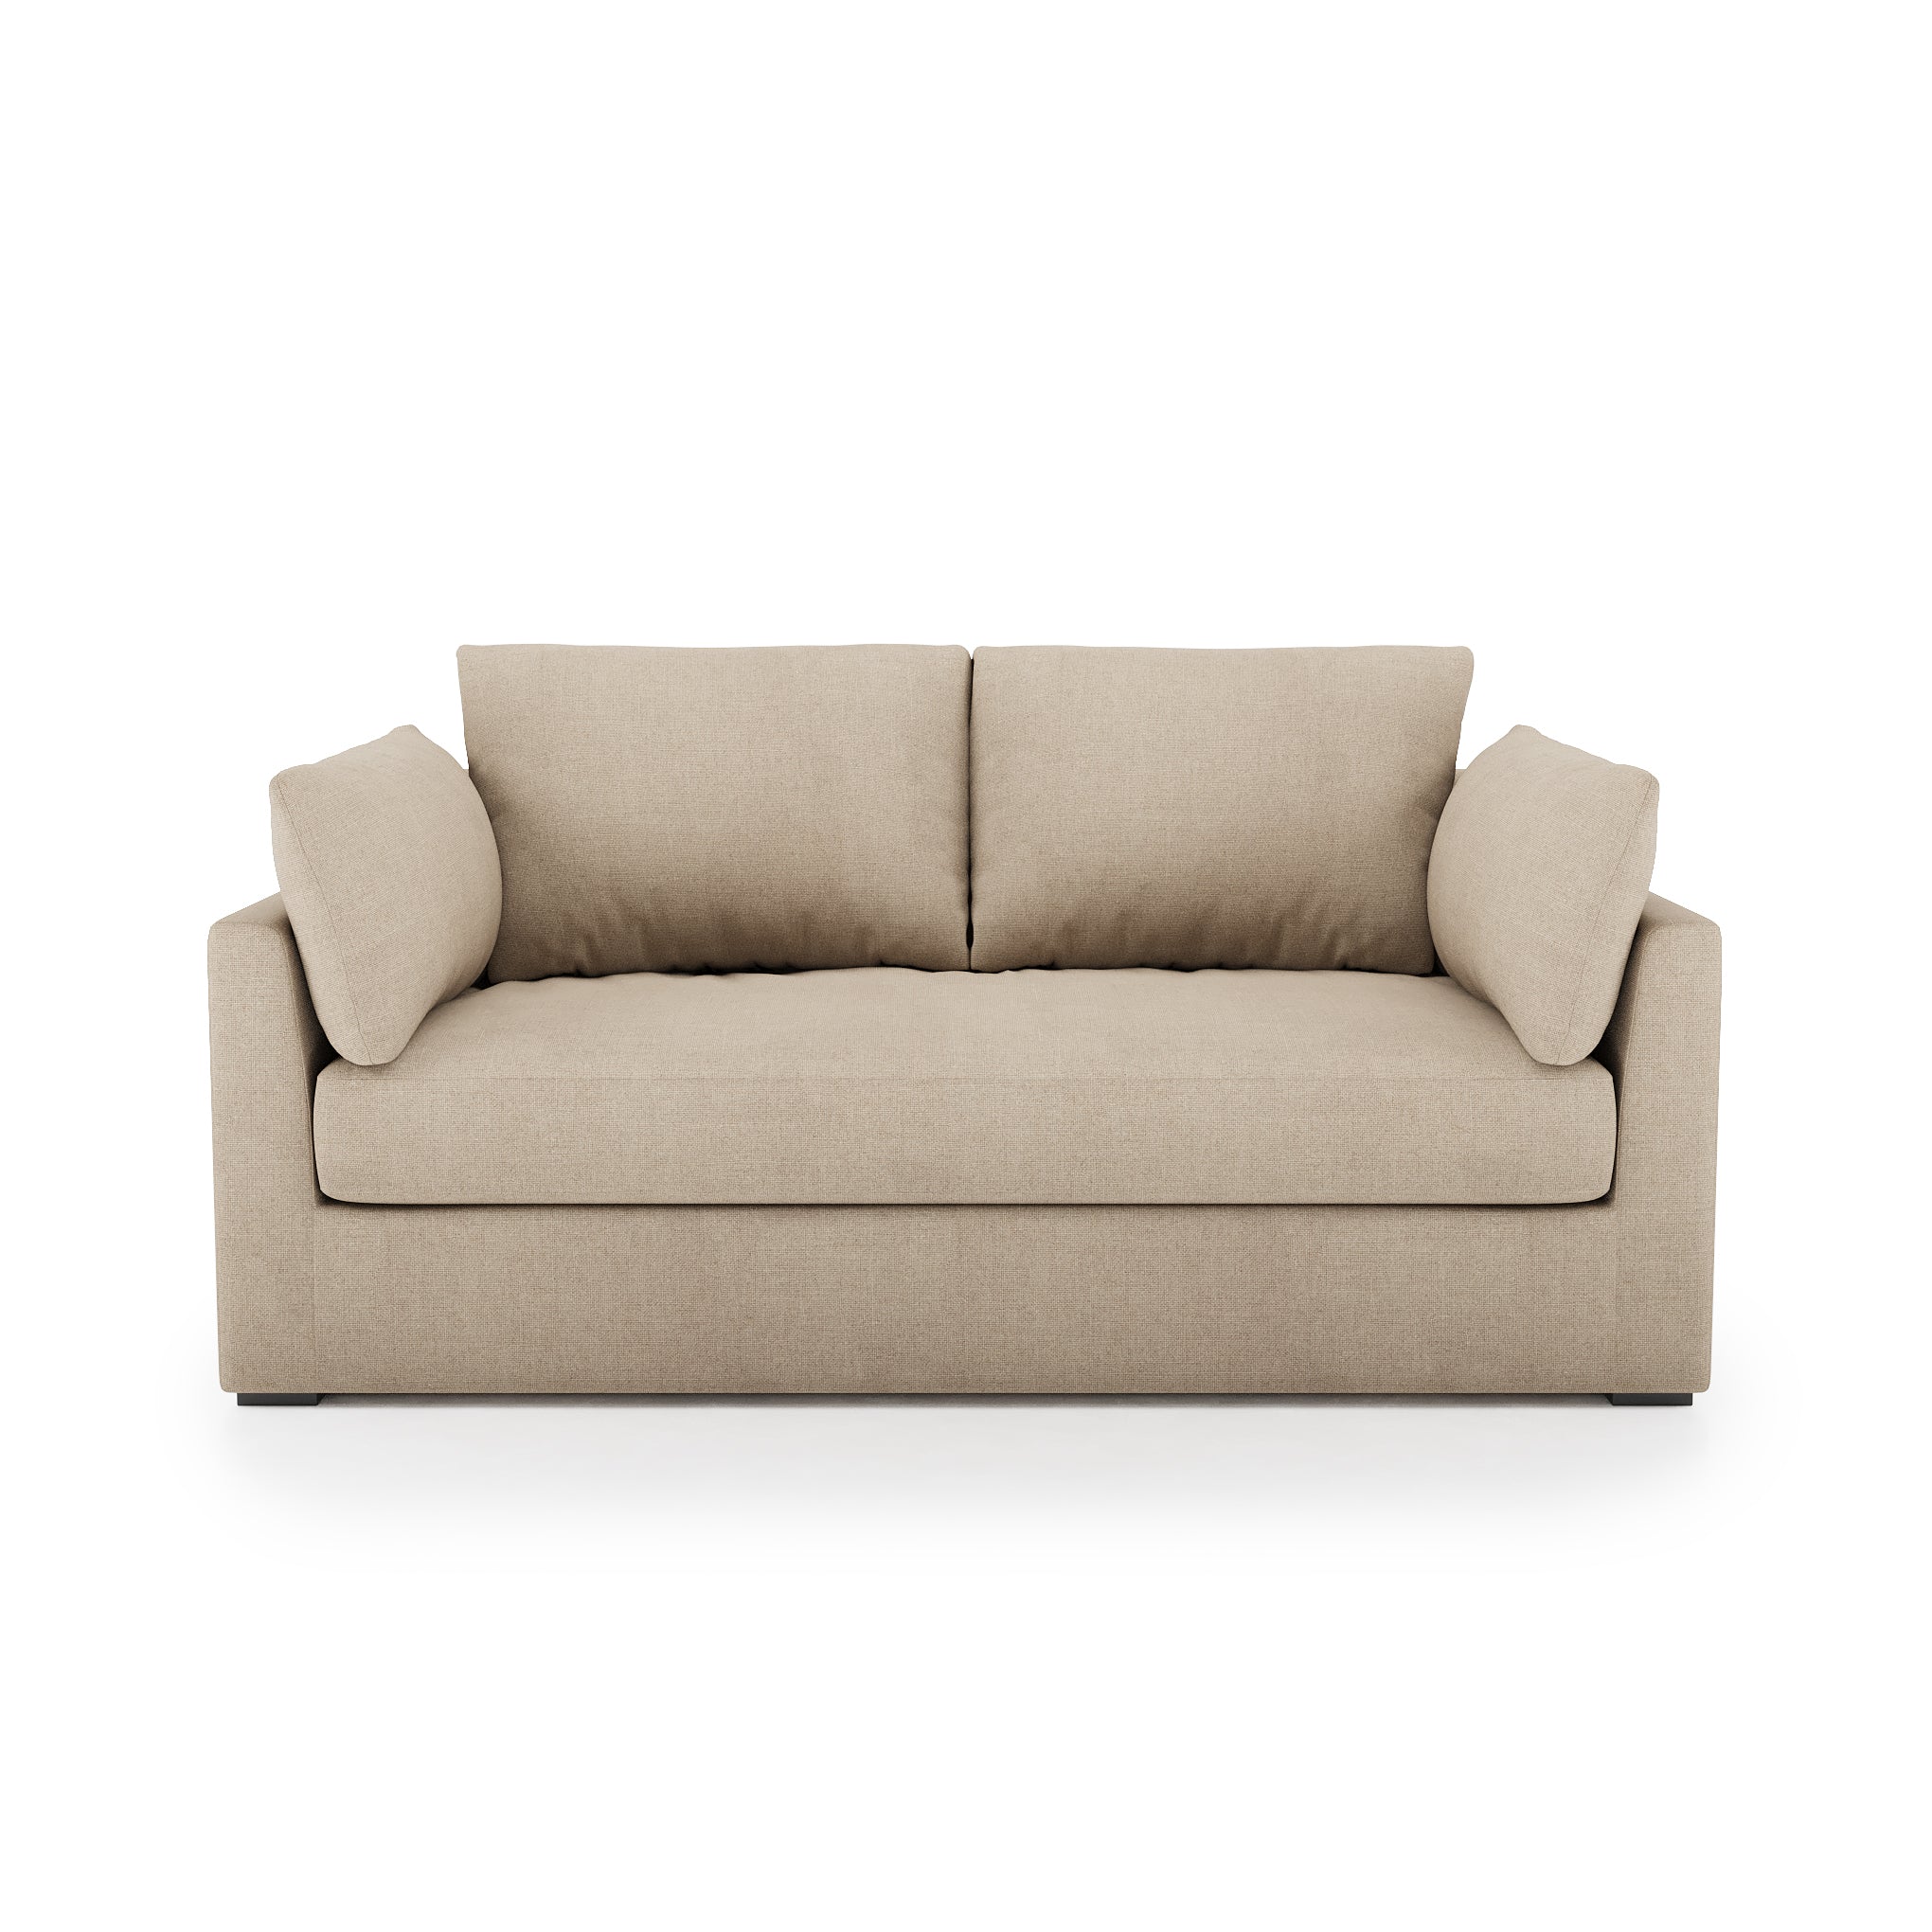 Serene Sofa natural linen front view Items range from $2999.00 to $3499.00